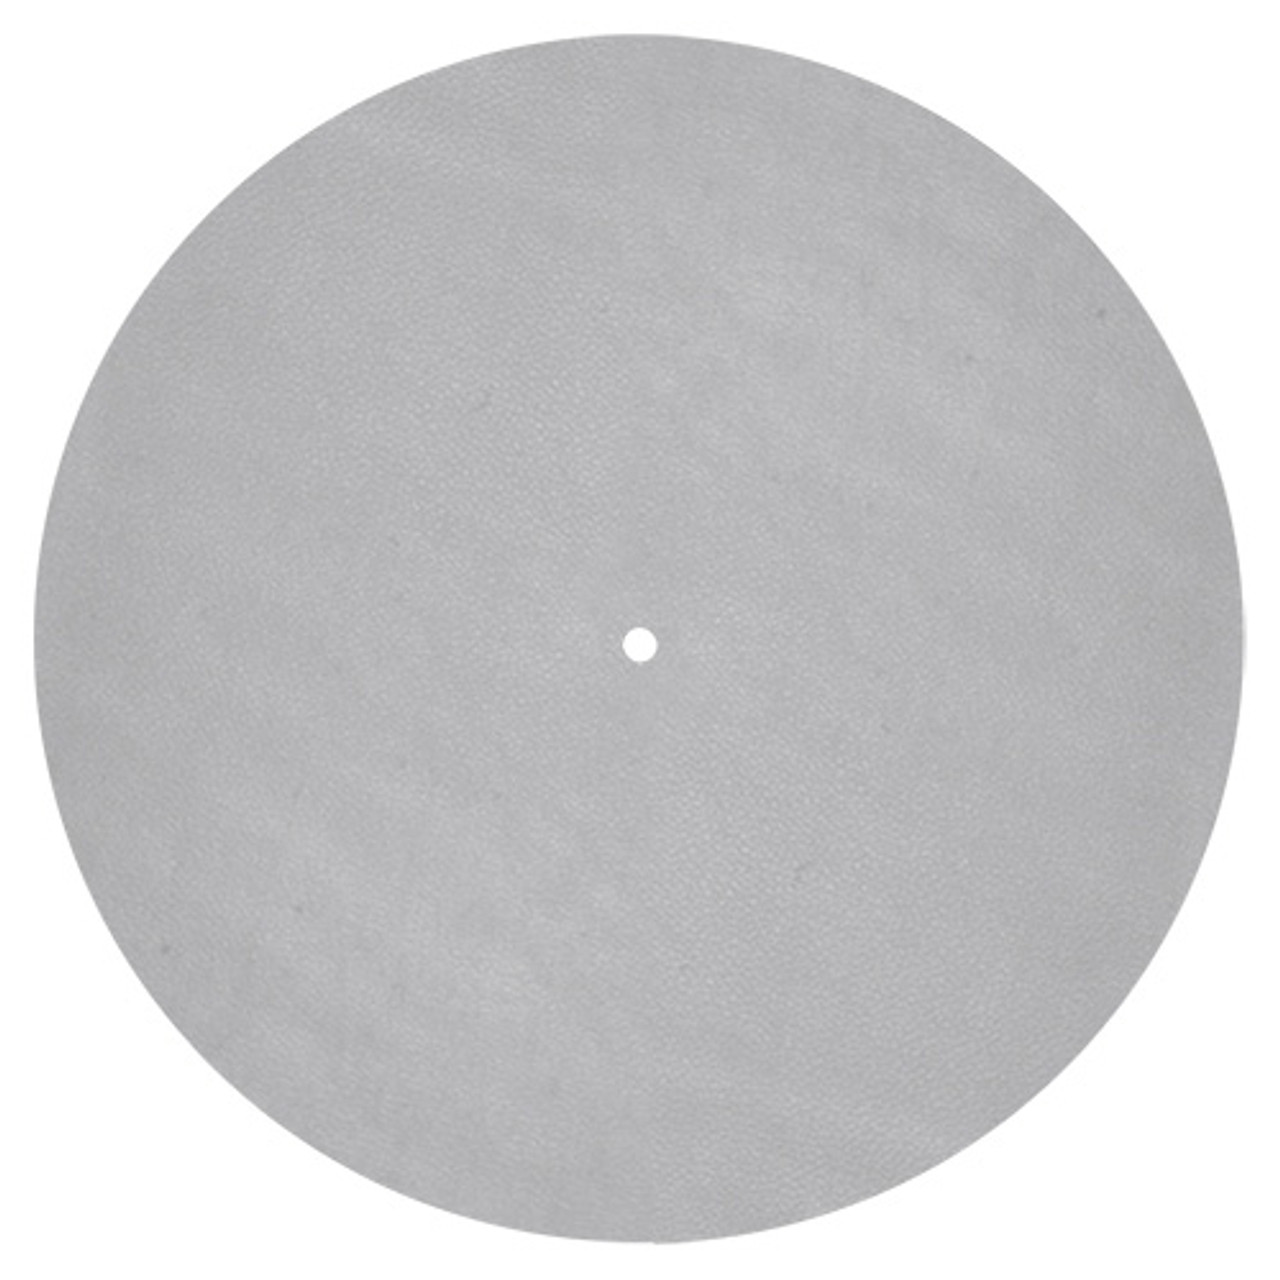 Pro-Ject Leather It Turntable Platter Leather Record Mat (Light Grey)